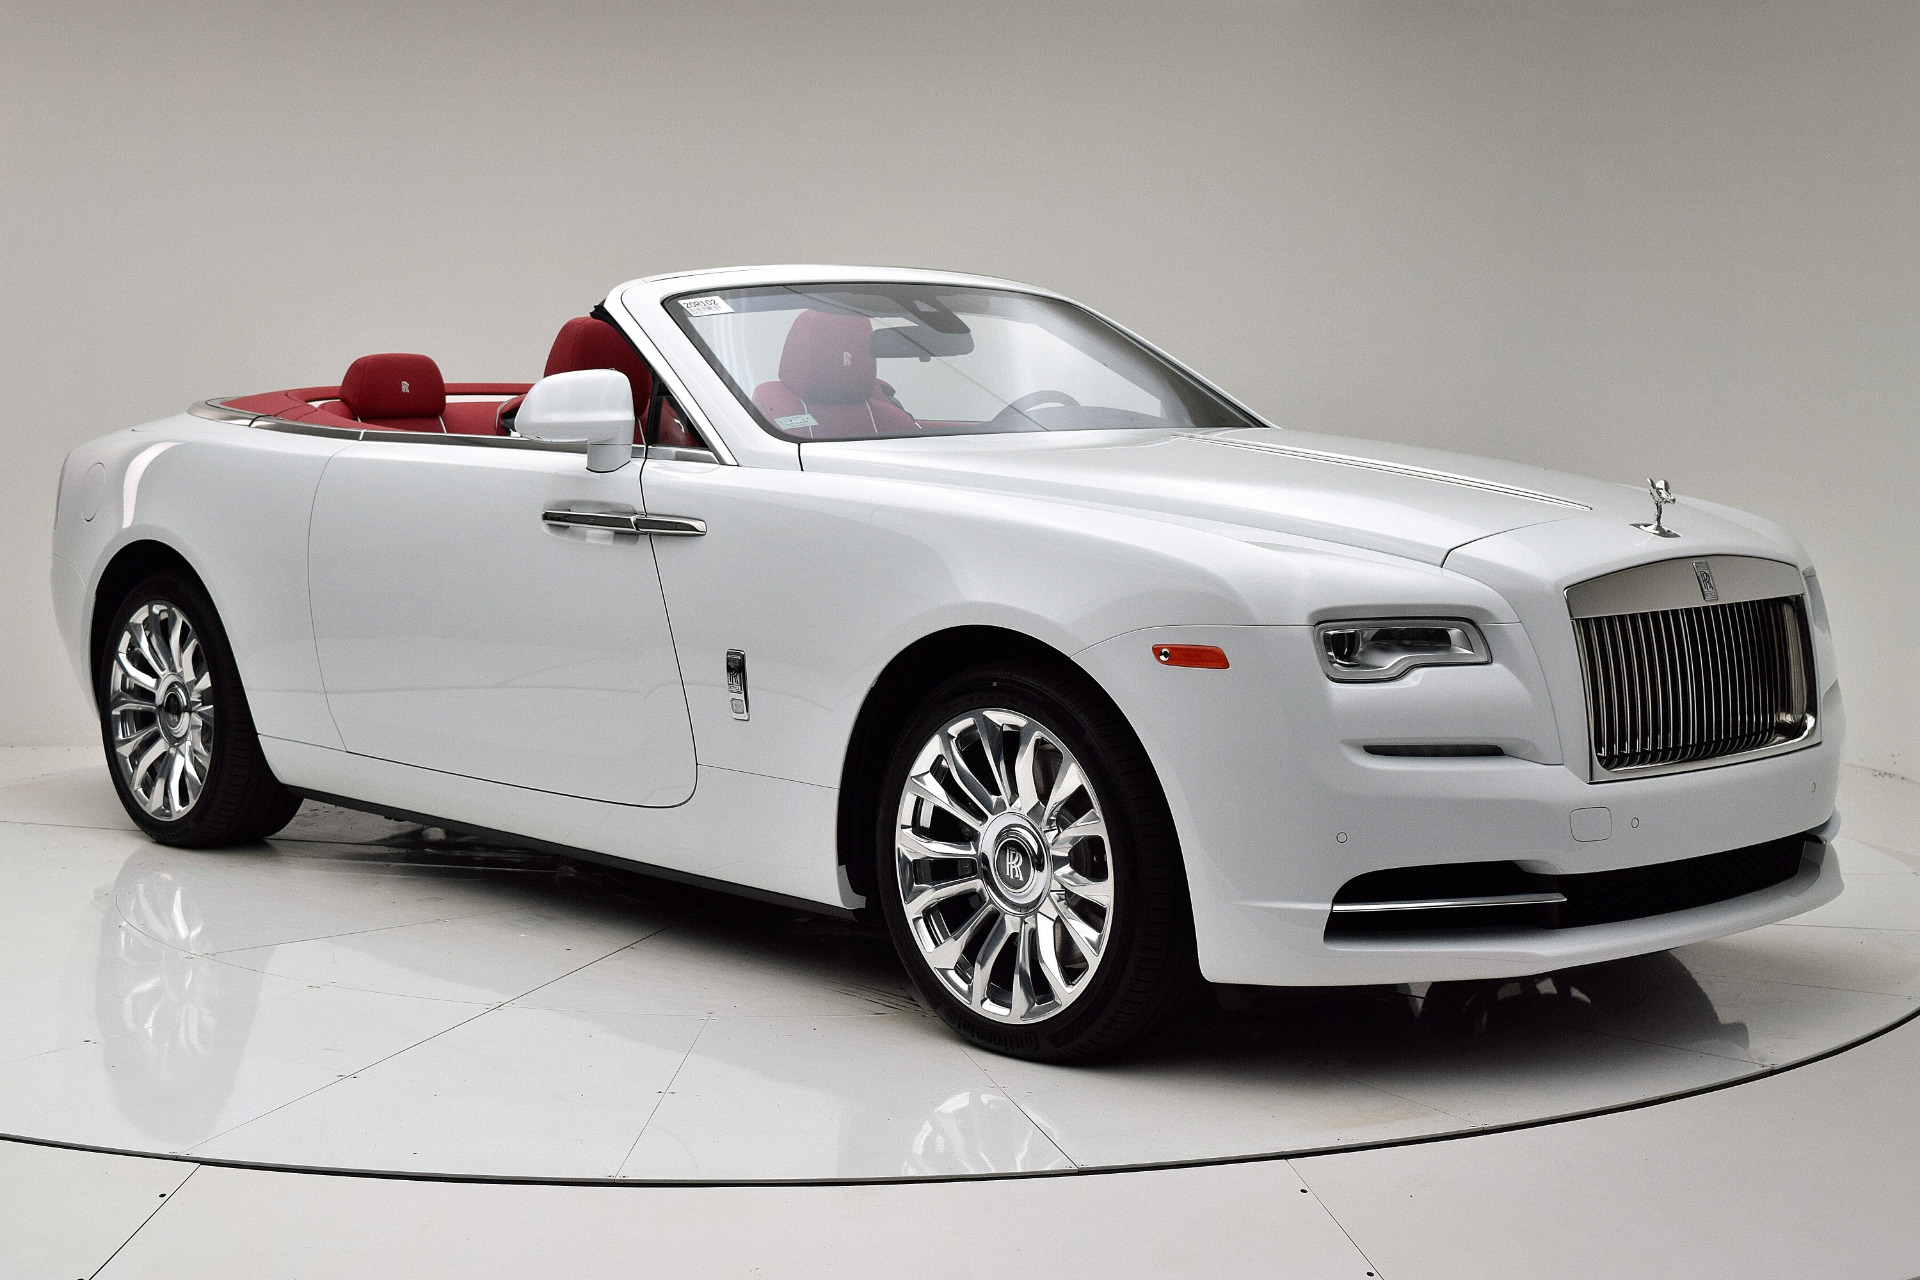 Used RollsRoyce Convertibles for Sale Near Me in Miami FL  Autotrader